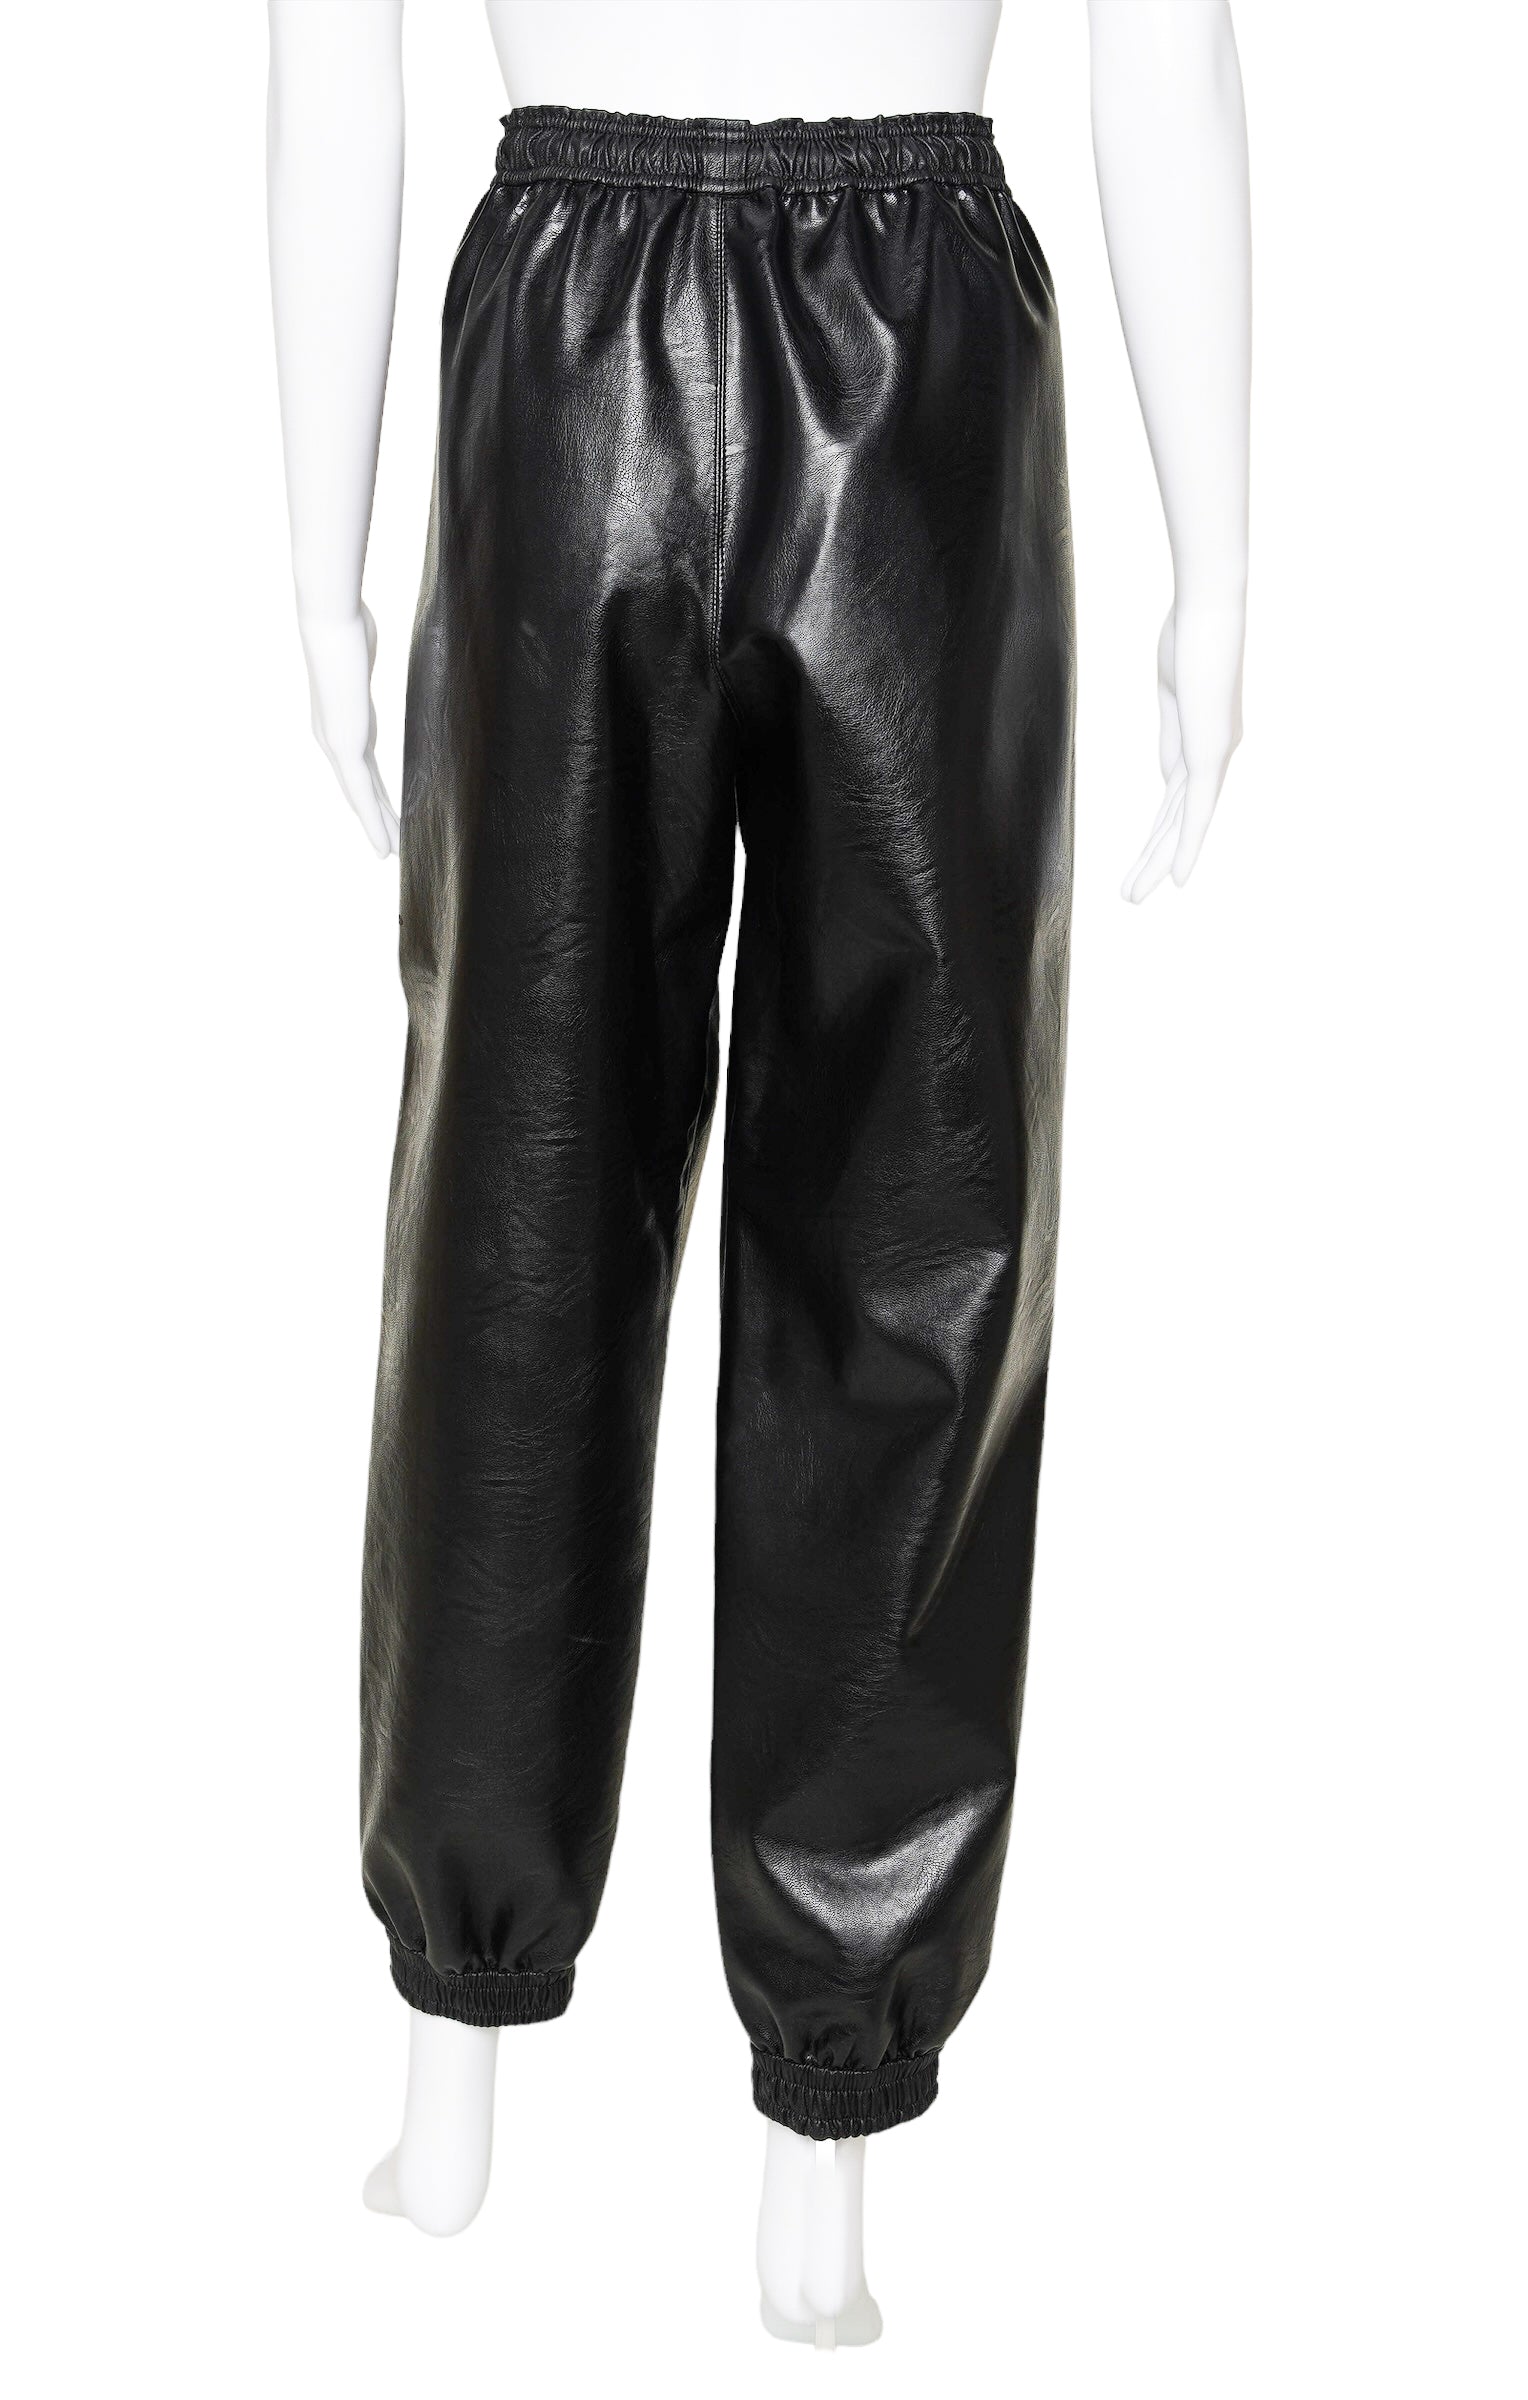 STELLA MCCARTNEY Pants Size: IT 44 / Comparable to US 6-8